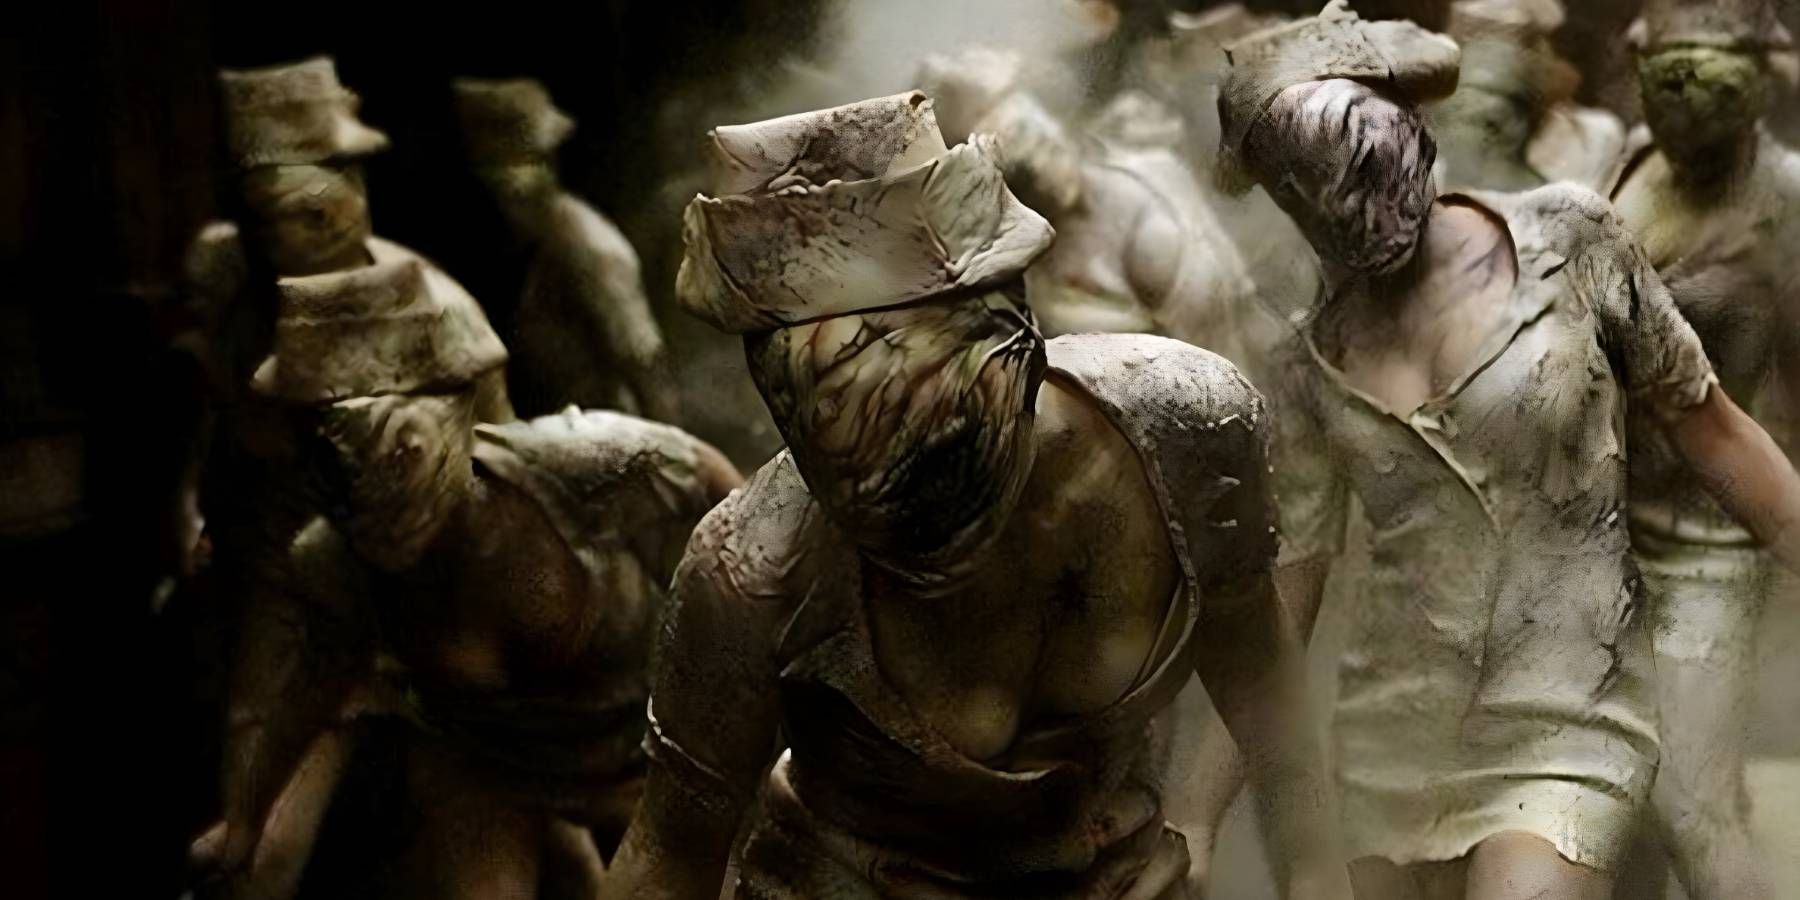 Silent Hill 2' Remake Leak Shows Nurse And New Gameplay Perspective